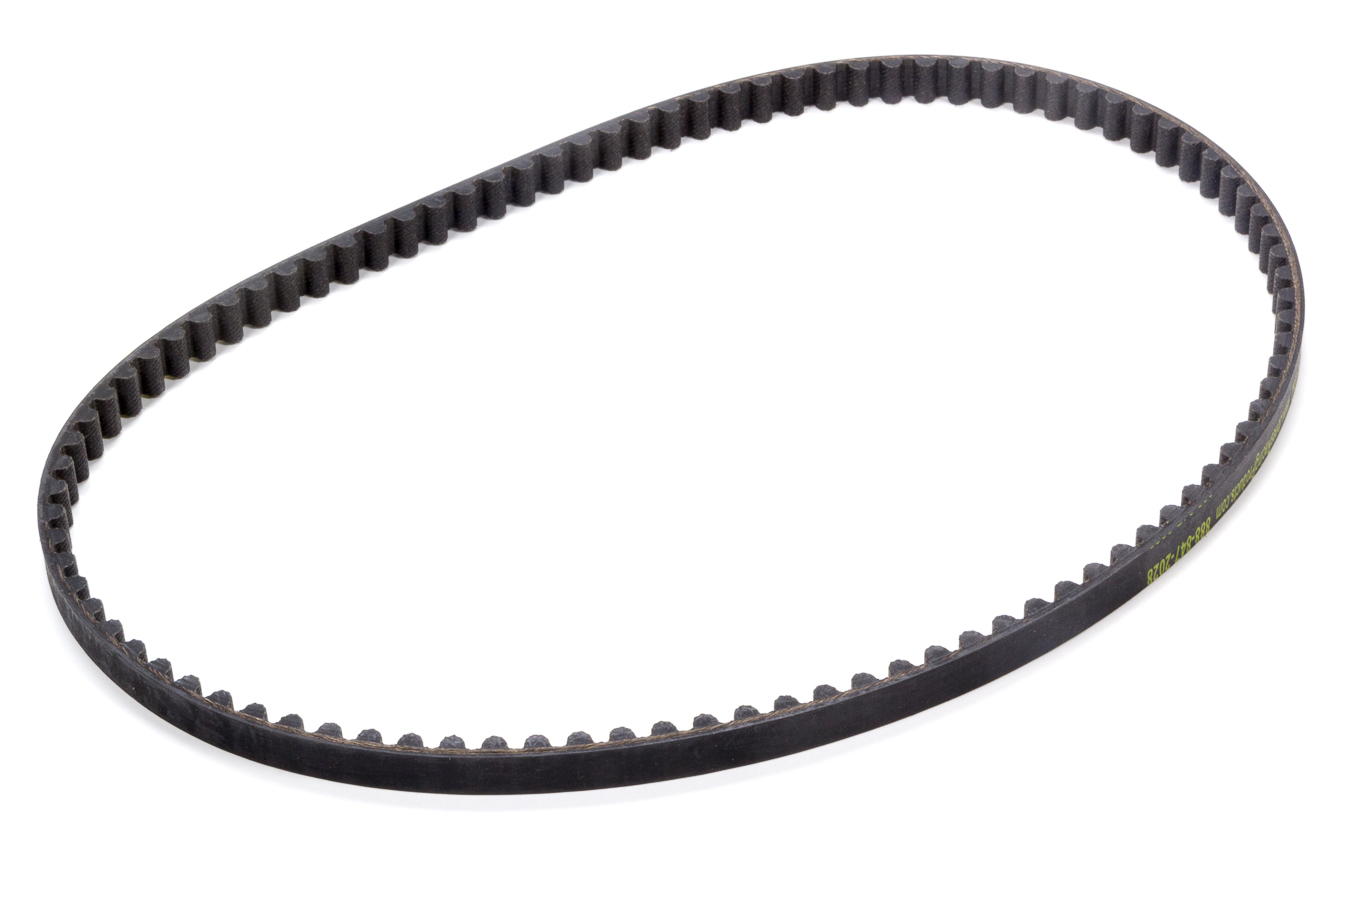 Jones Racing Products 760-10HD HTD Drive Belt, 29.920 in Long, 10 mm Wide, 8 mm Pitch, Each